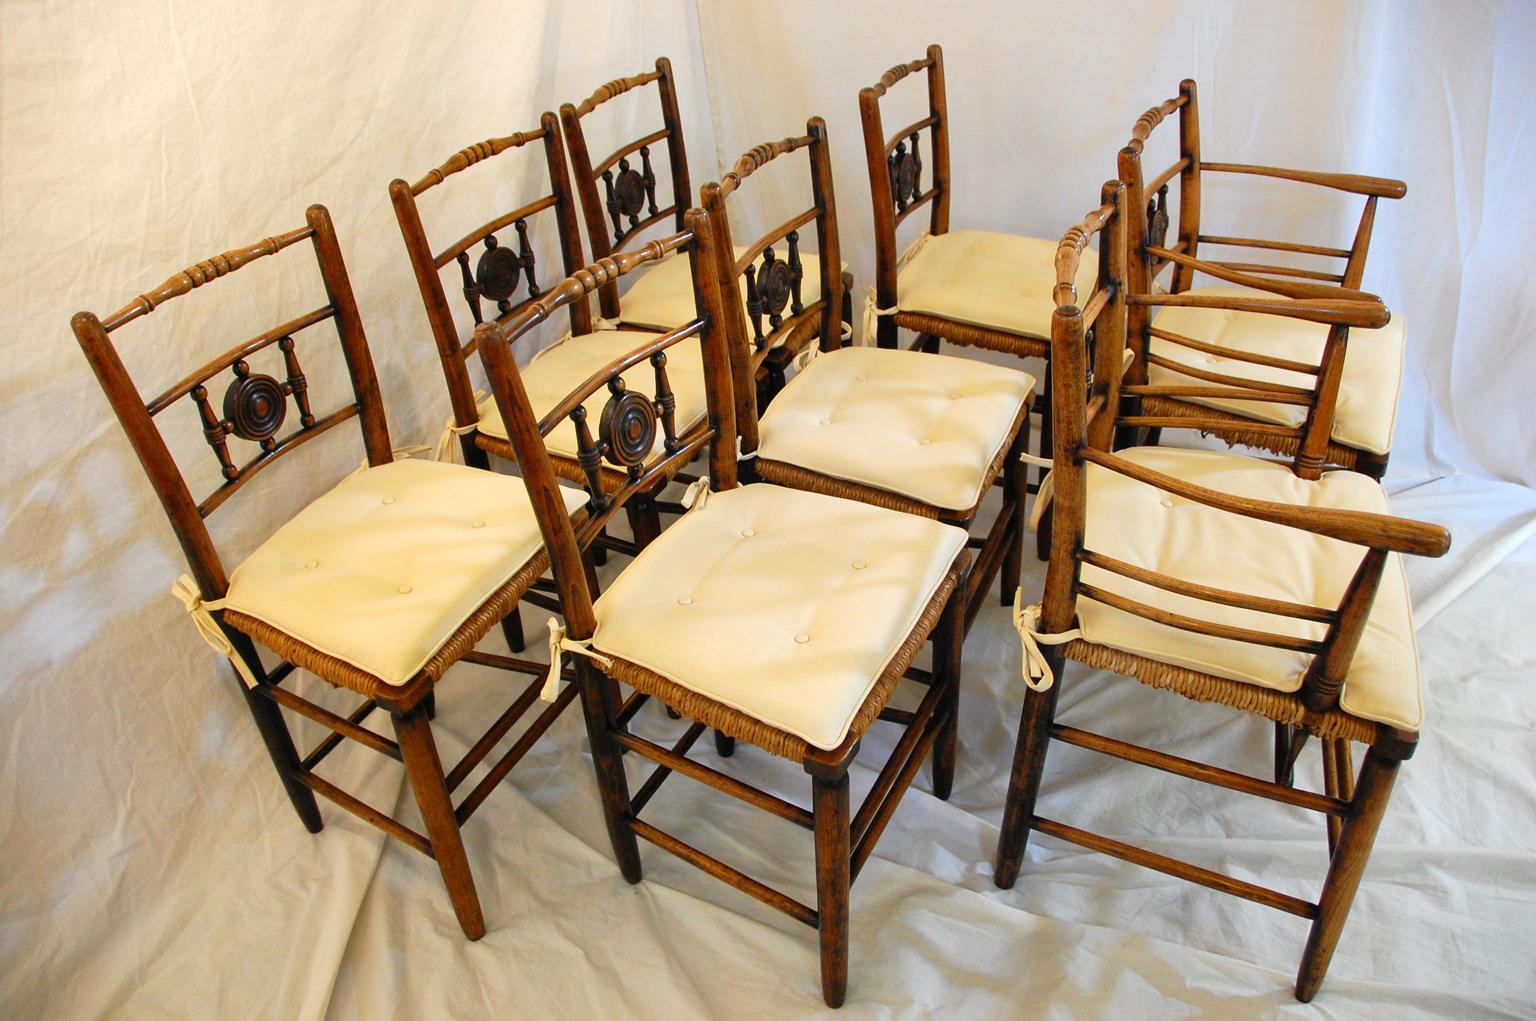 English mid-19th century set of eight Sussex elm dining chairs, consisting of two armchairs and six side chairs. This is an unusual model of the Sussex chair as it has the interesting turned center sphere to the back (most just have spindles). The